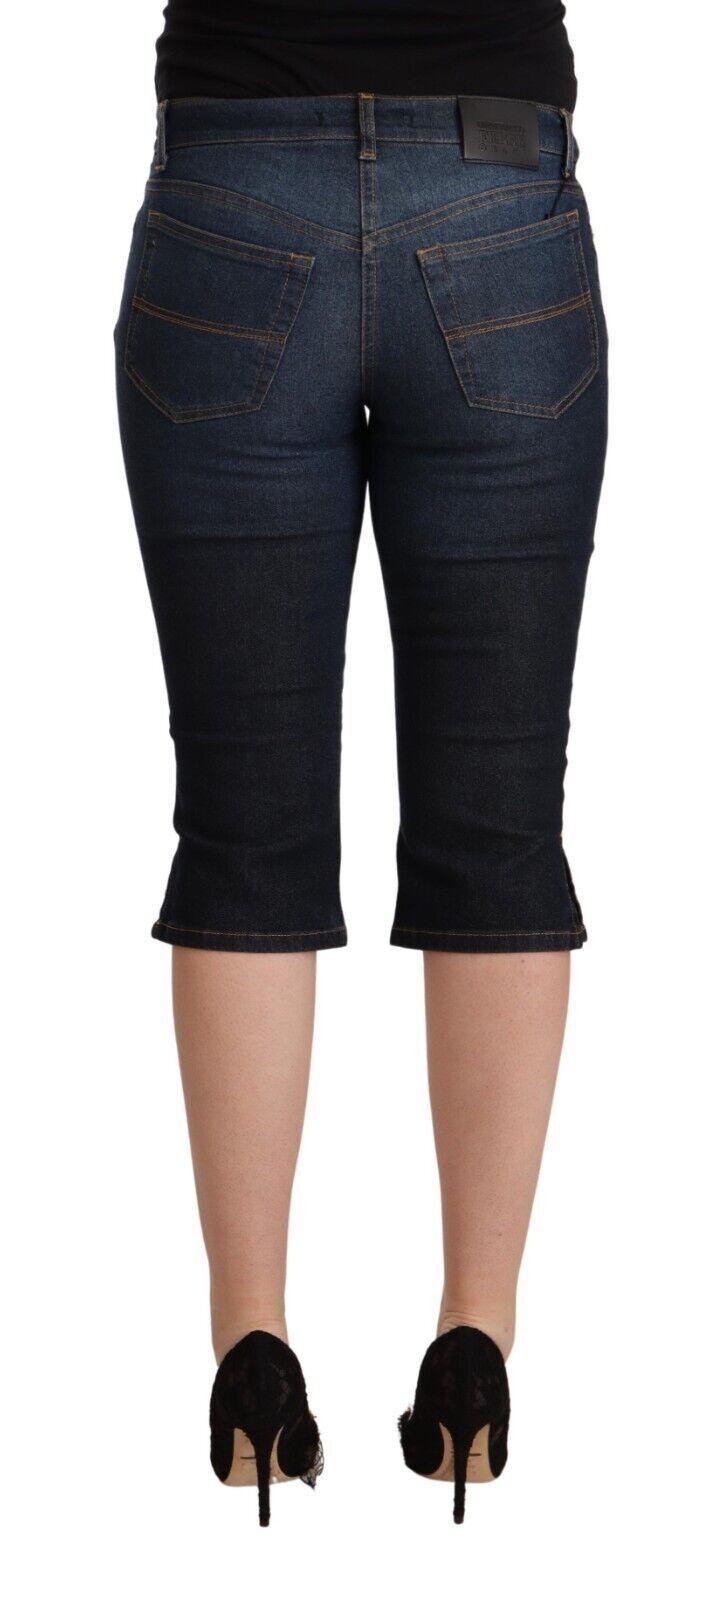 GF Ferre Ladies Blue Cotton Stretch Low Waist Slim Capri Denim Jeans - Designed by GF Ferre Available to Buy at a Discounted Price on Moon Behind The Hill Online Designer Discount Store